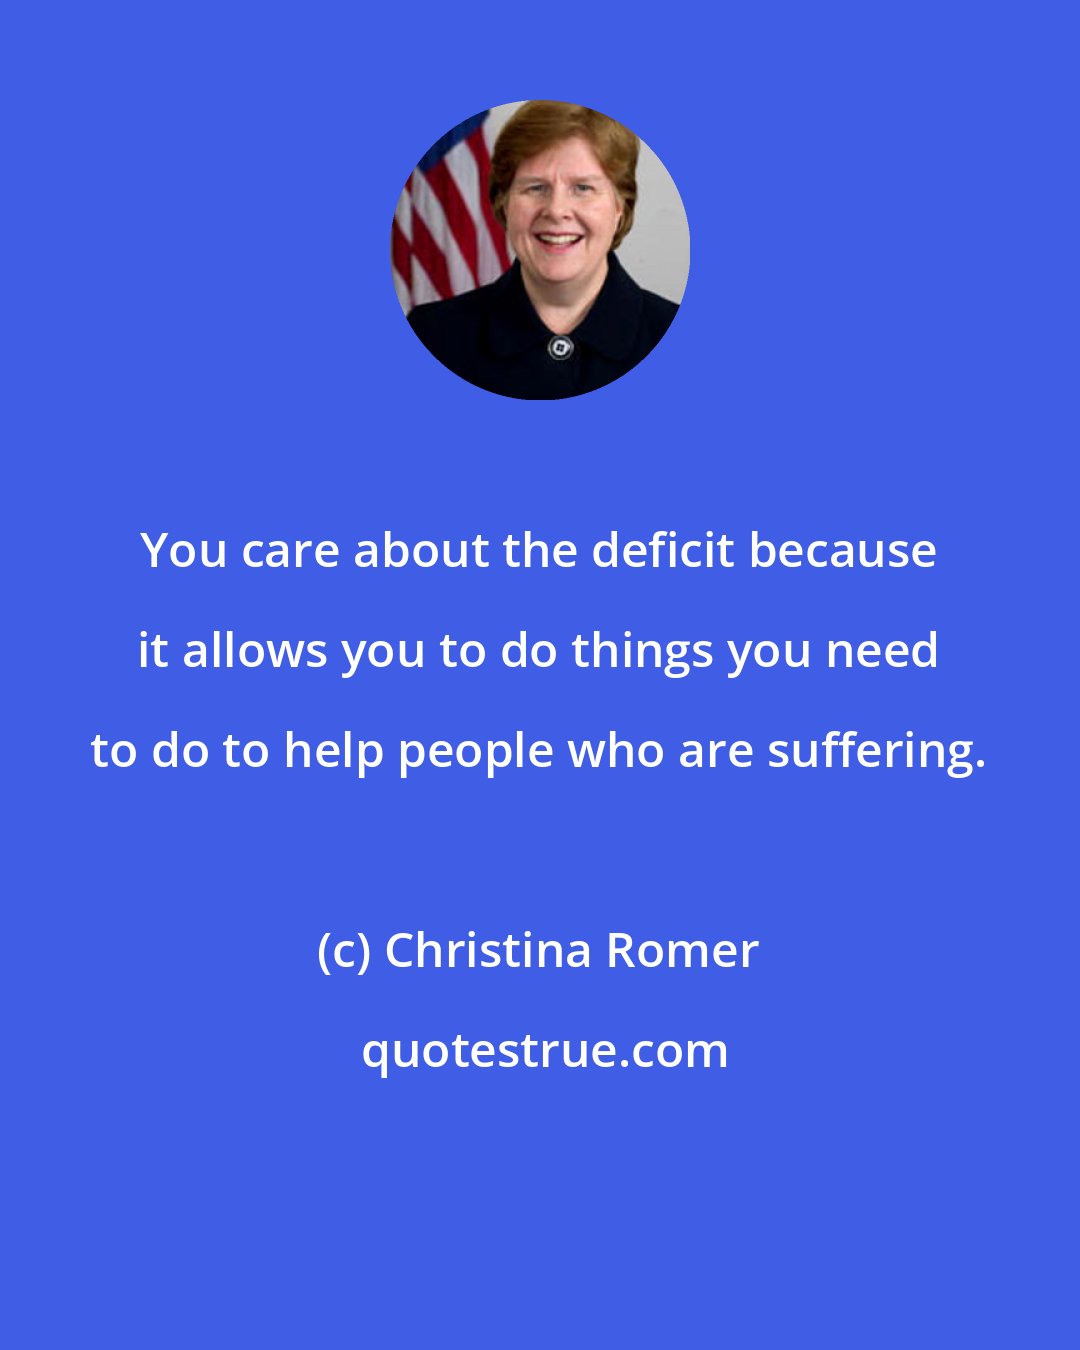 Christina Romer: You care about the deficit because it allows you to do things you need to do to help people who are suffering.